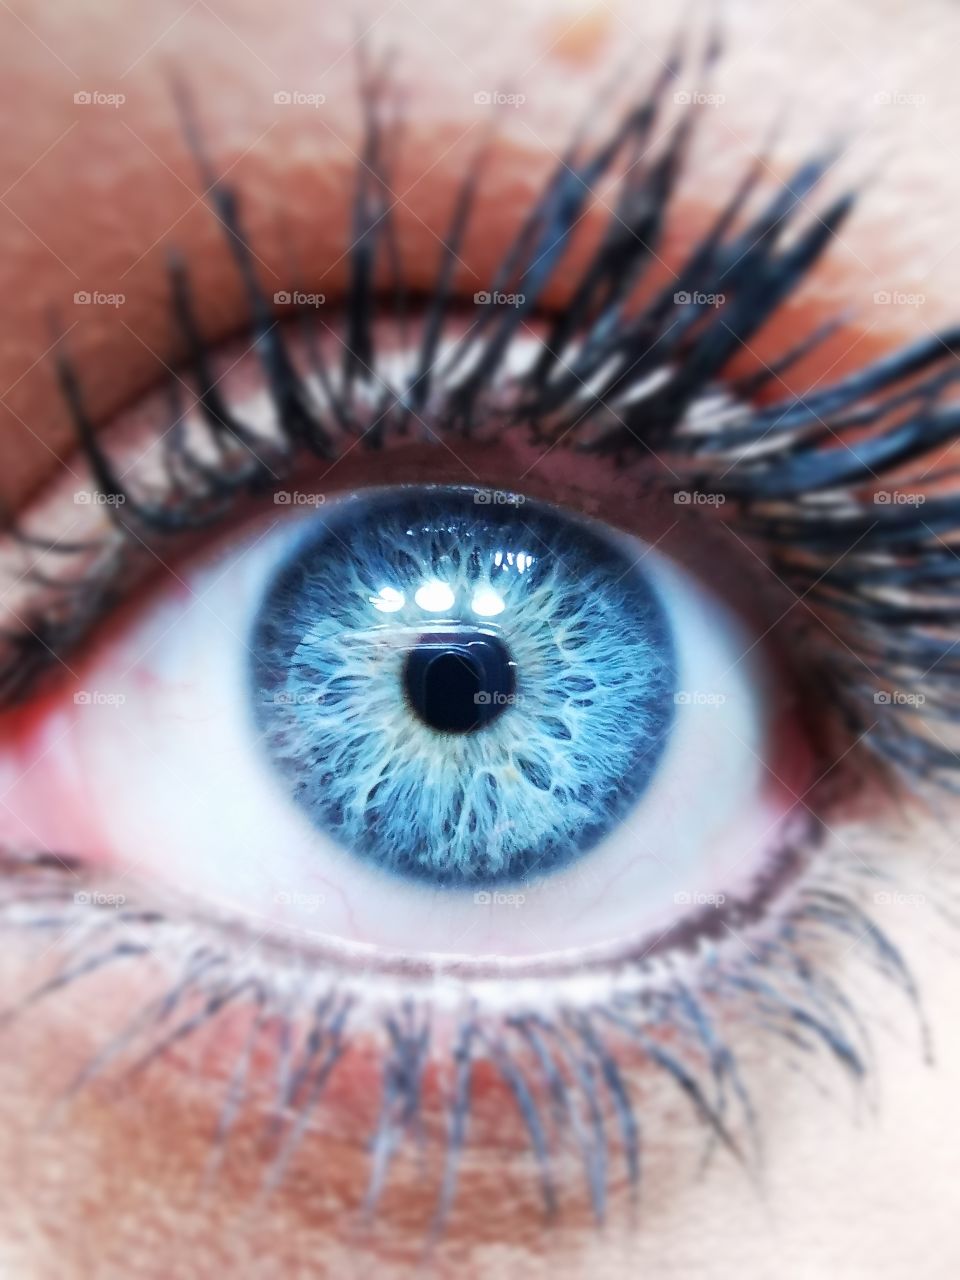 Close up of a blue eye. White web like pattern within the blue.